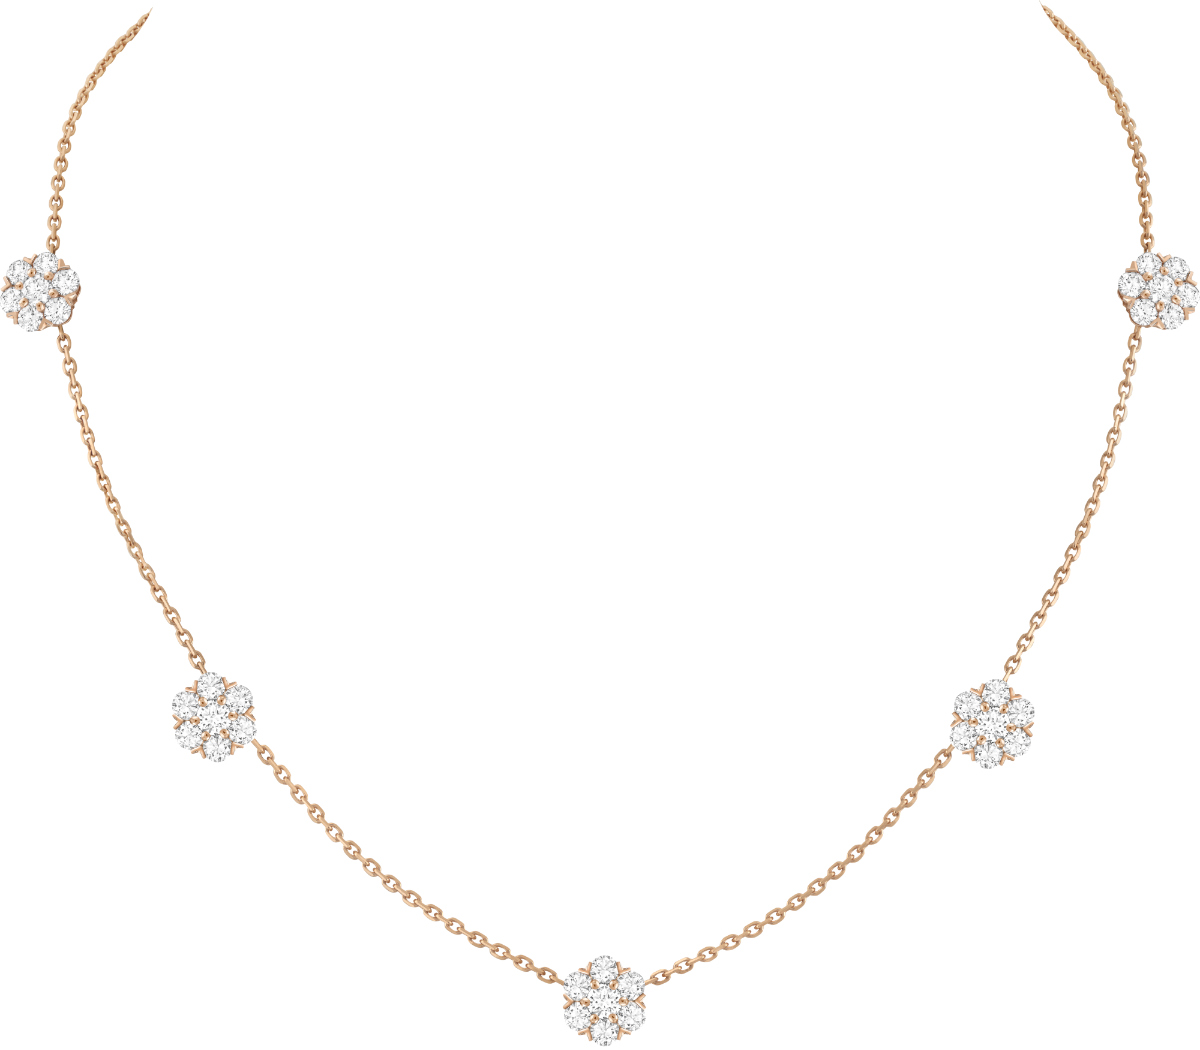 New Additions To Van Cleef & Arpels' Fleurette Collection